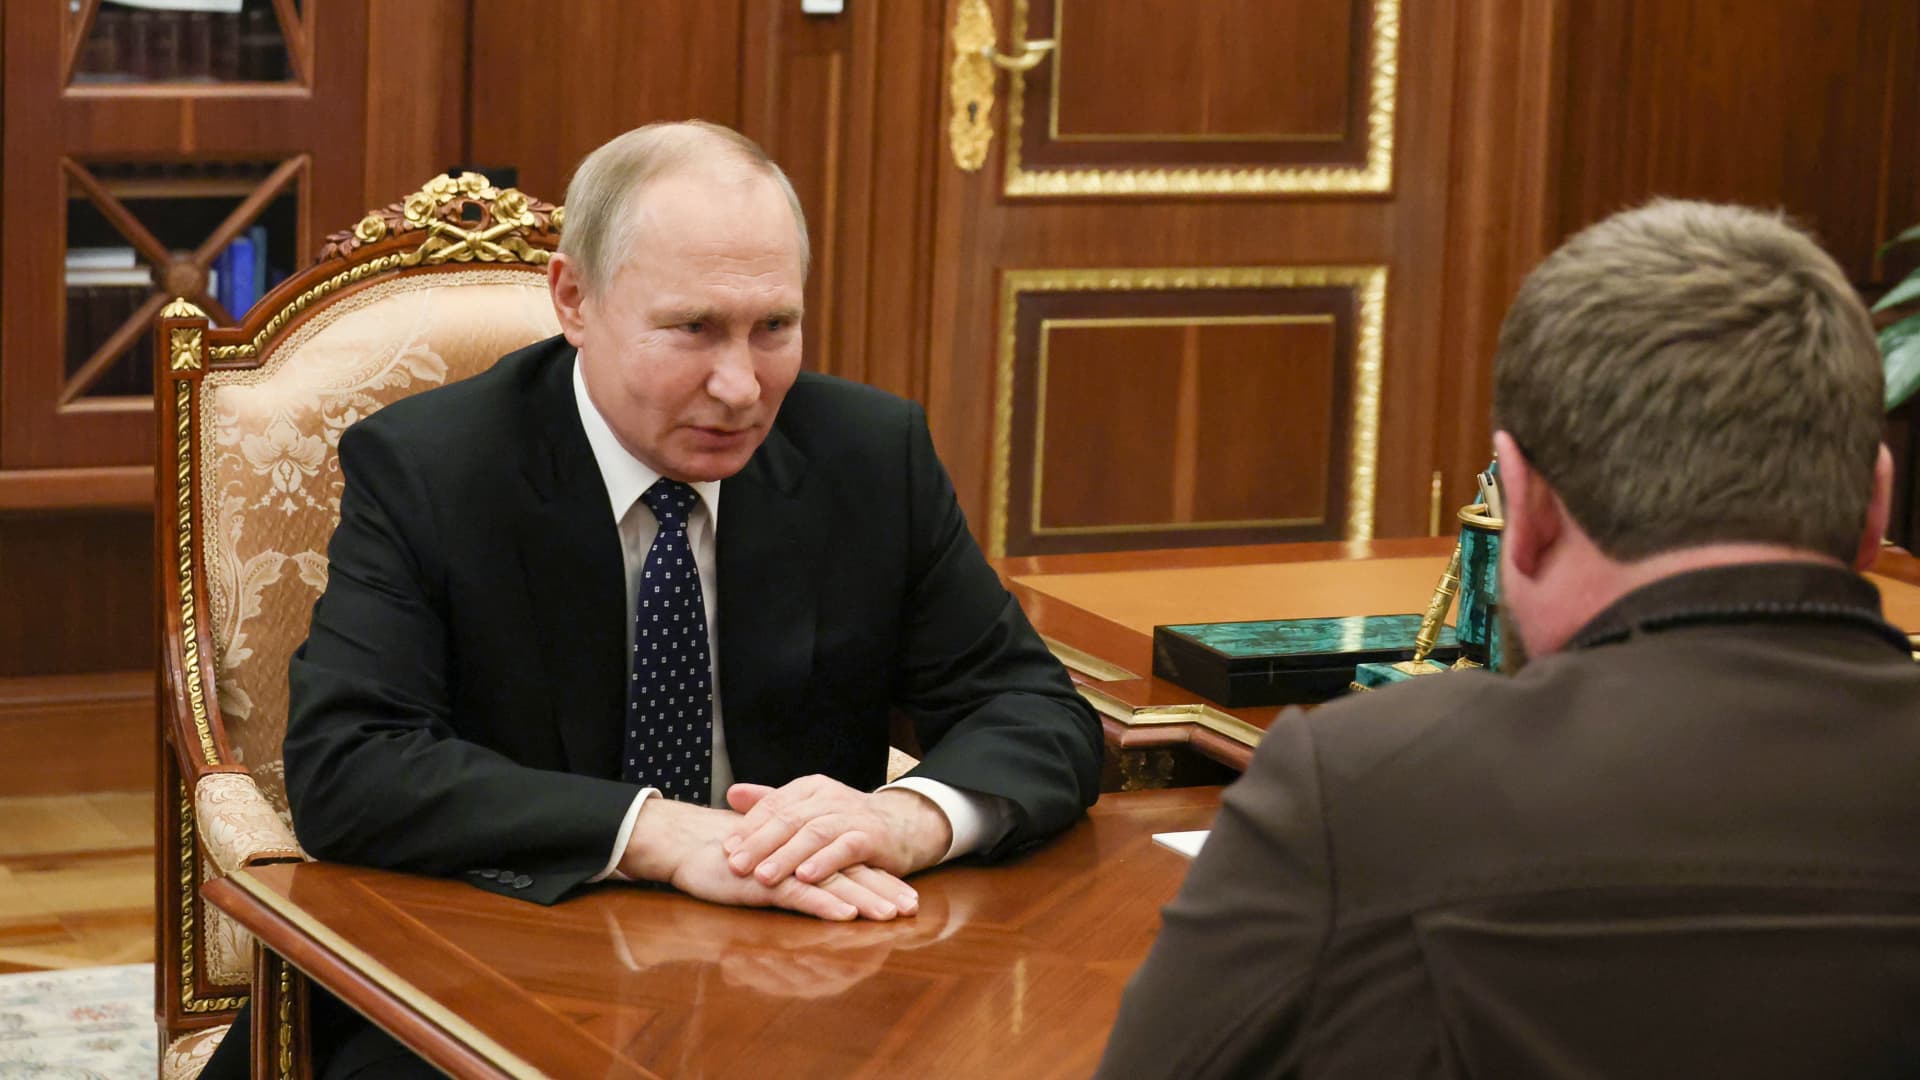 Russian President Vladimir Putin meets with Chechen leader Ramzan Kadyrov at the Kremlin in Moscow on March 13, 2023.